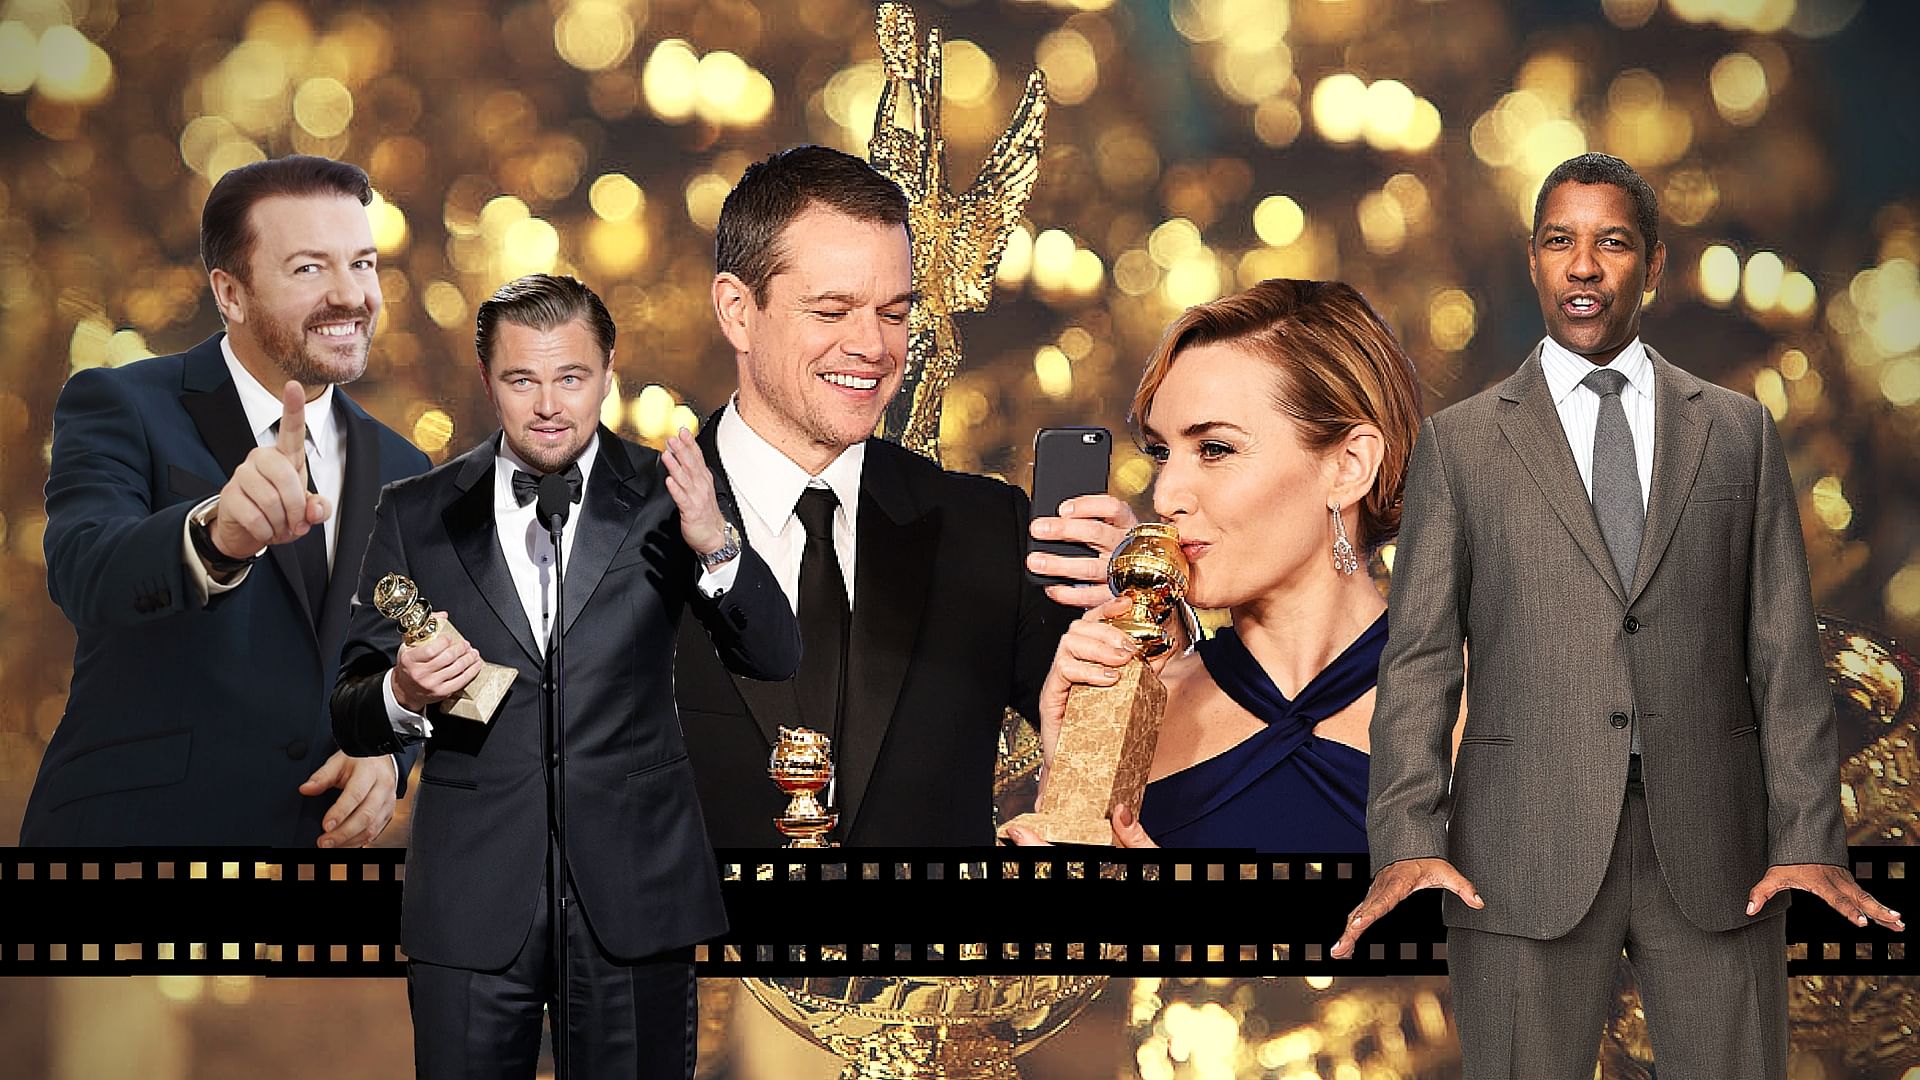 If you missed the 73rd Golden Globes, catch up with these important highlights